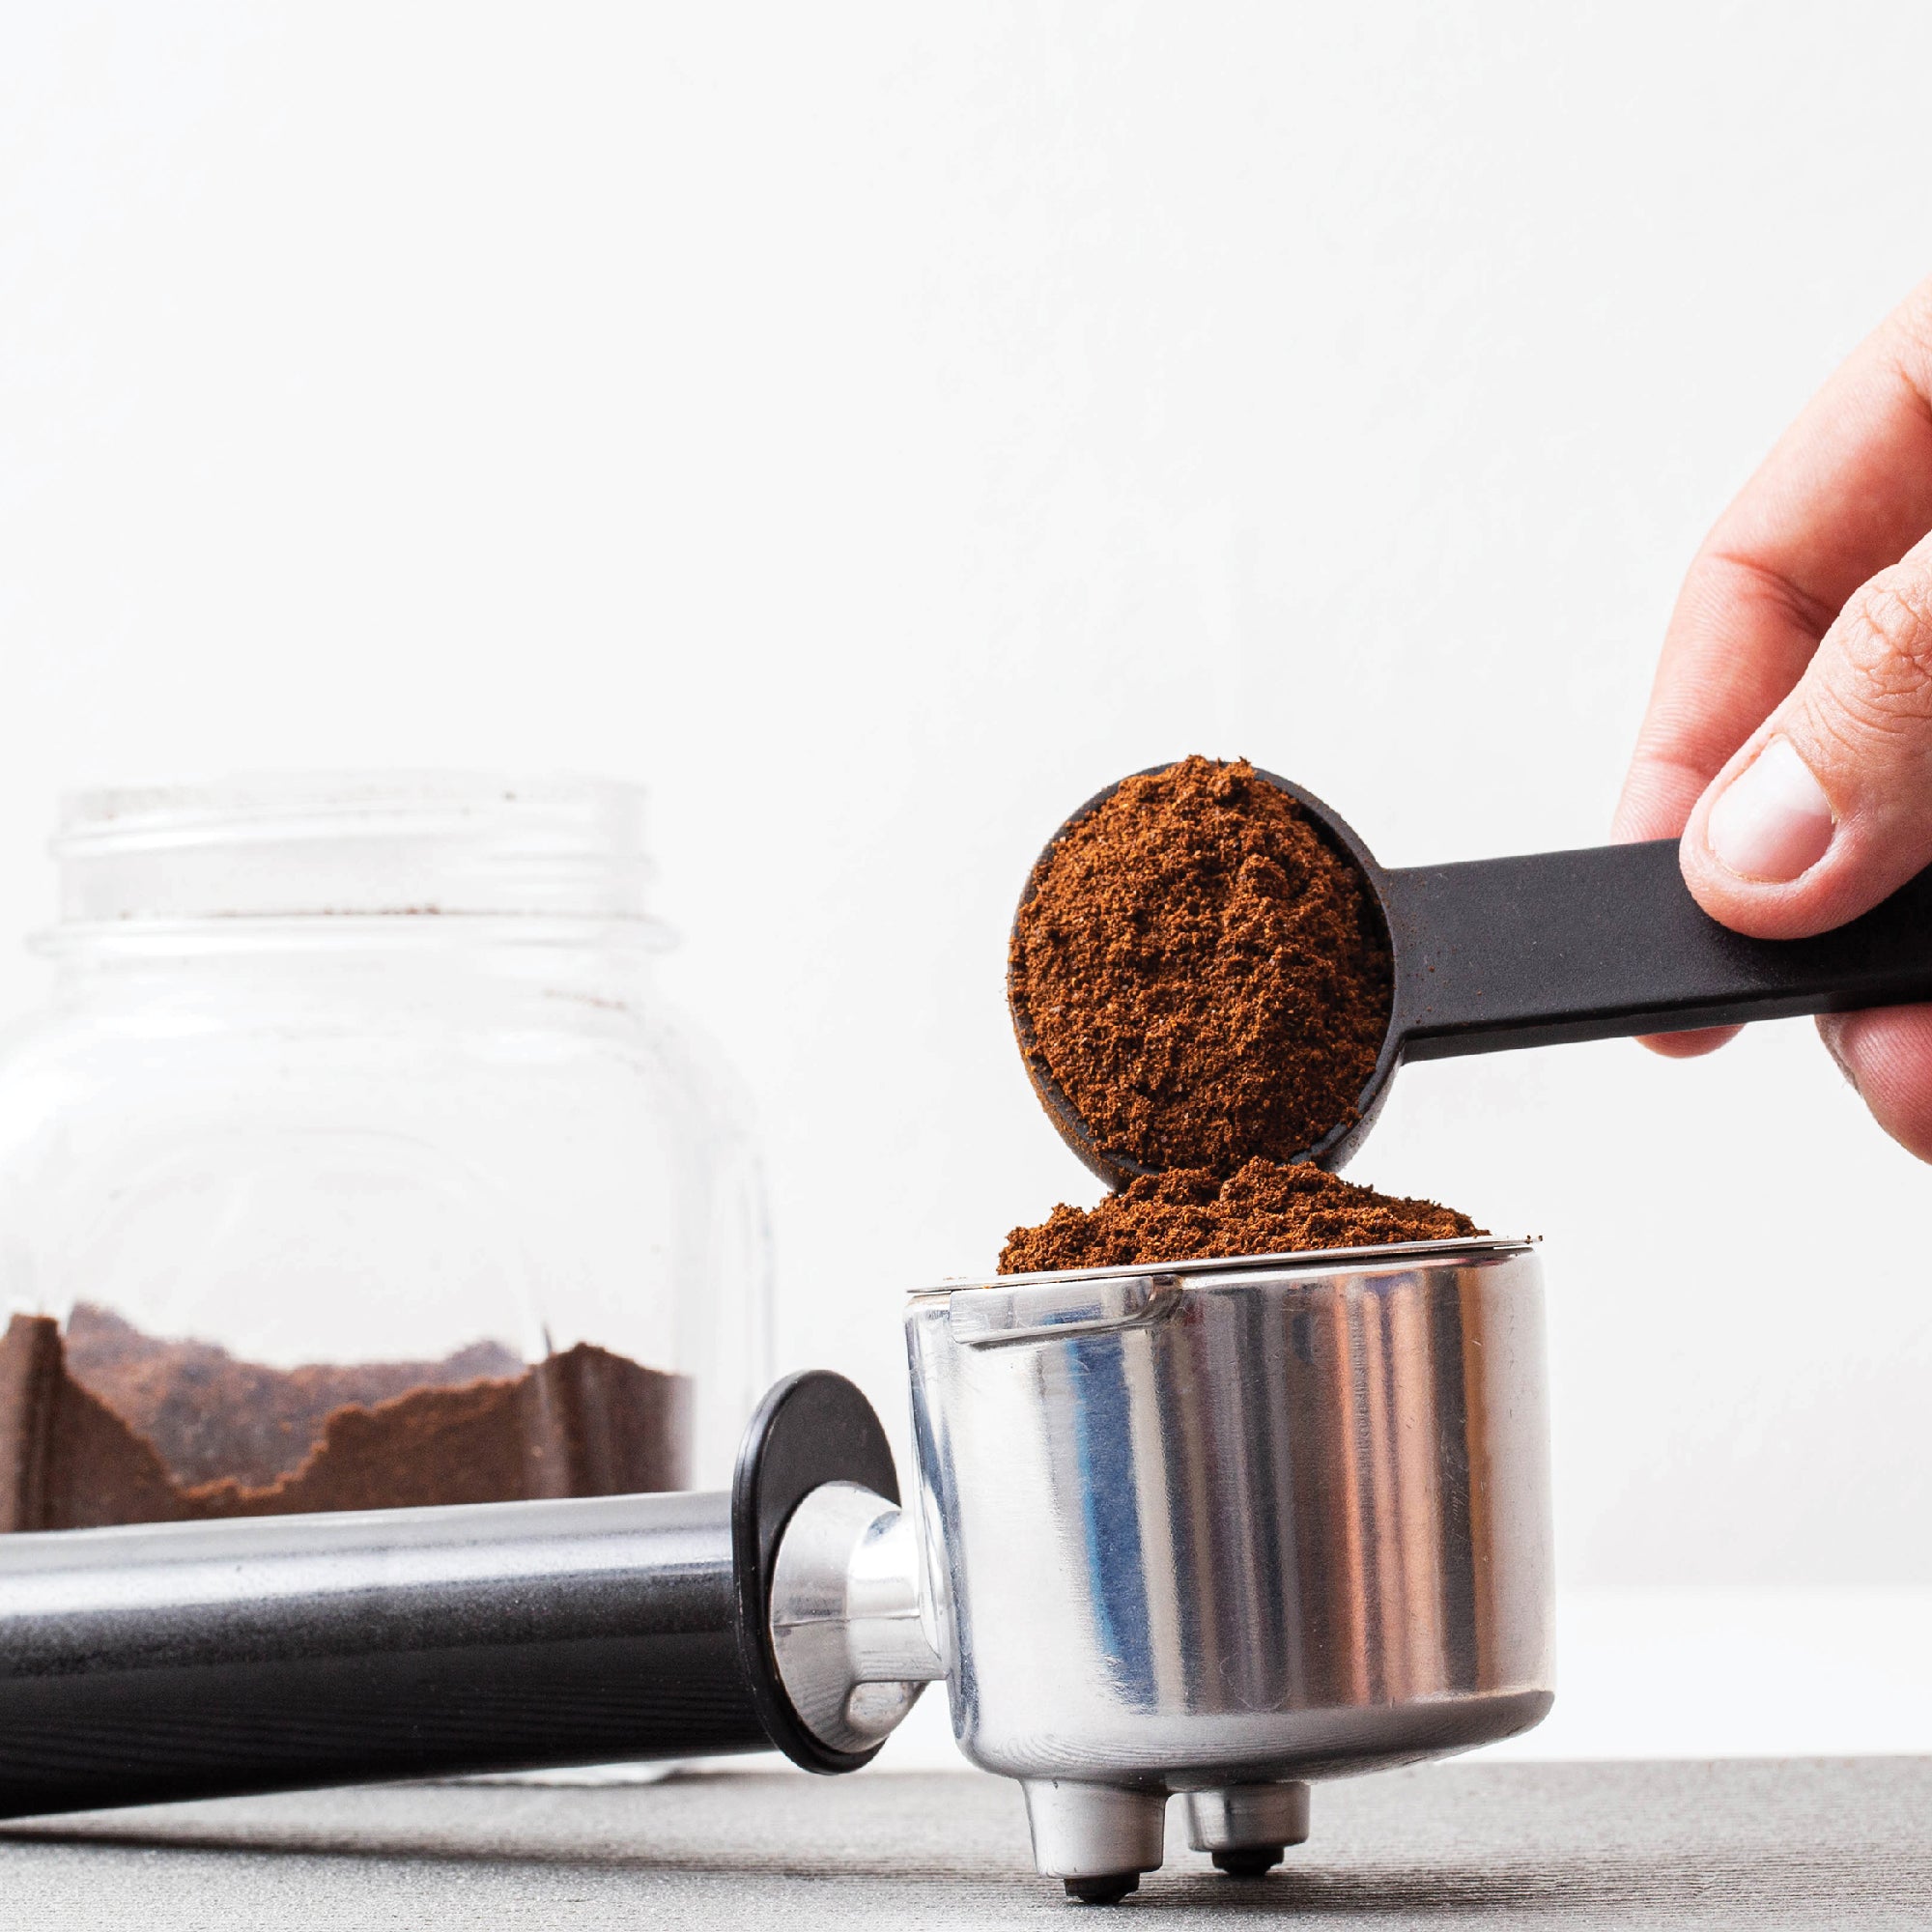 All You Need to Know about Coffee Ratios: How Many Scoops of Coffee Should You Use per Cup?